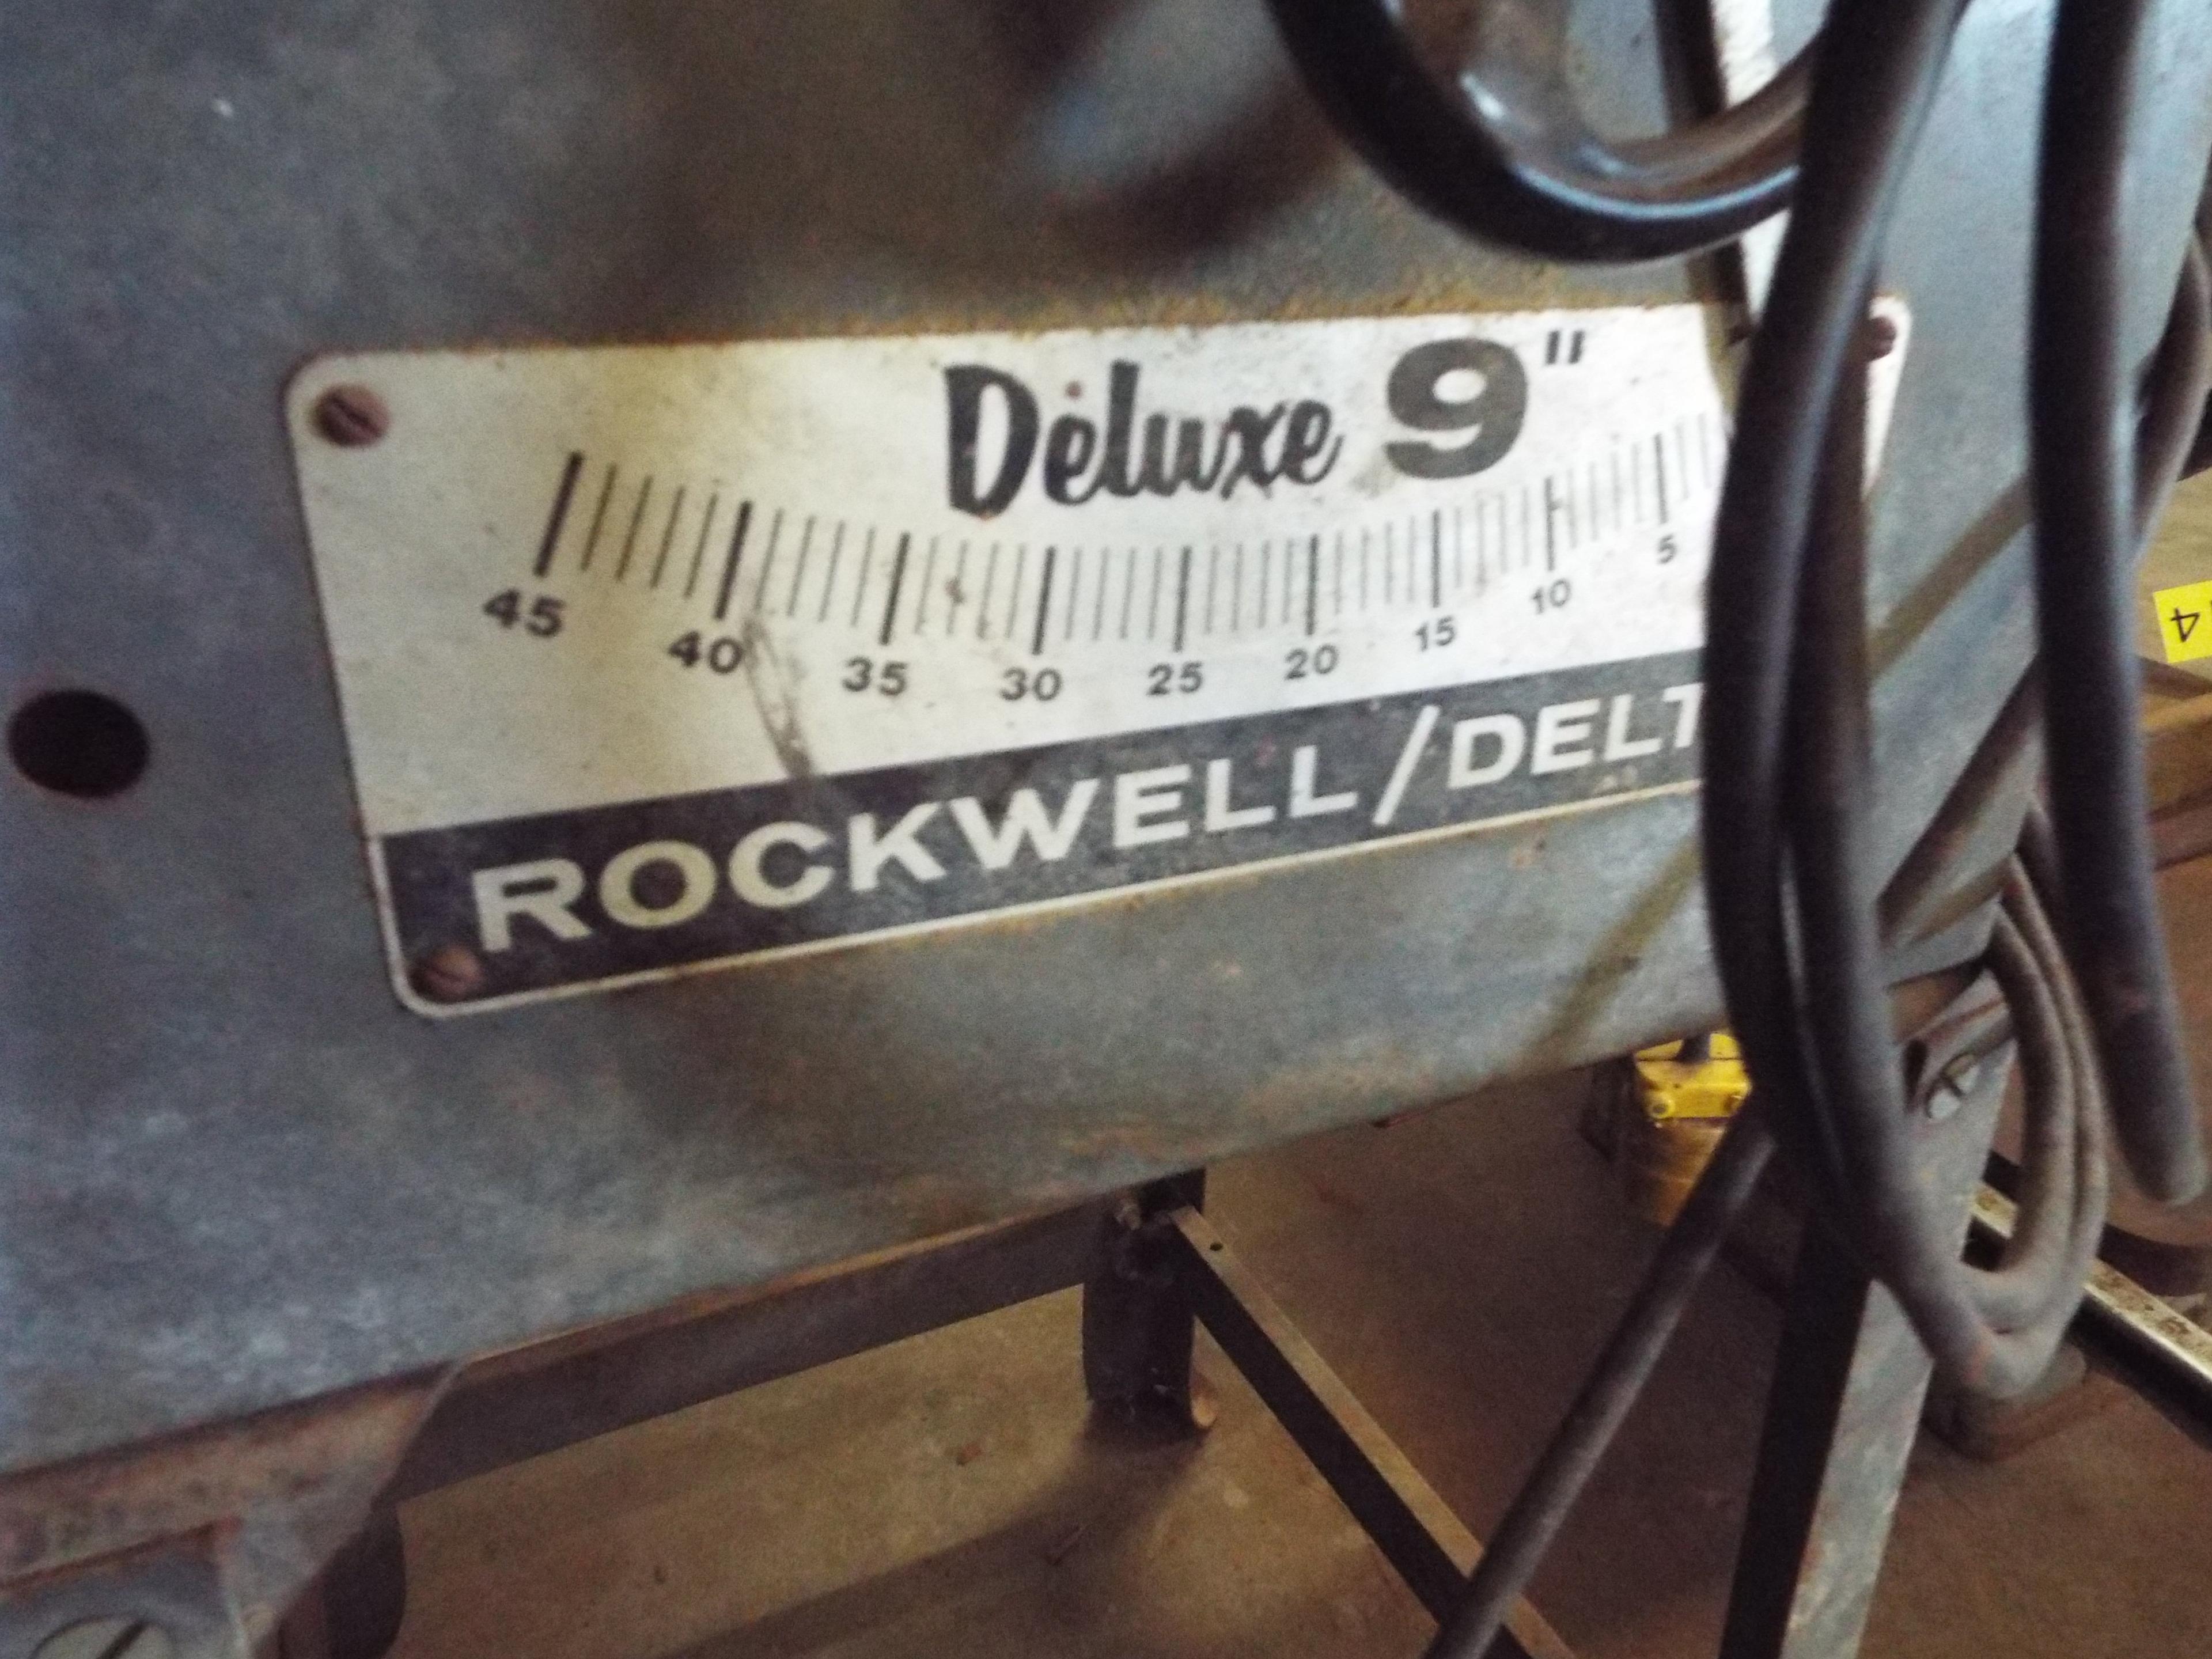 Rockwell Delta 9" table saw, works good